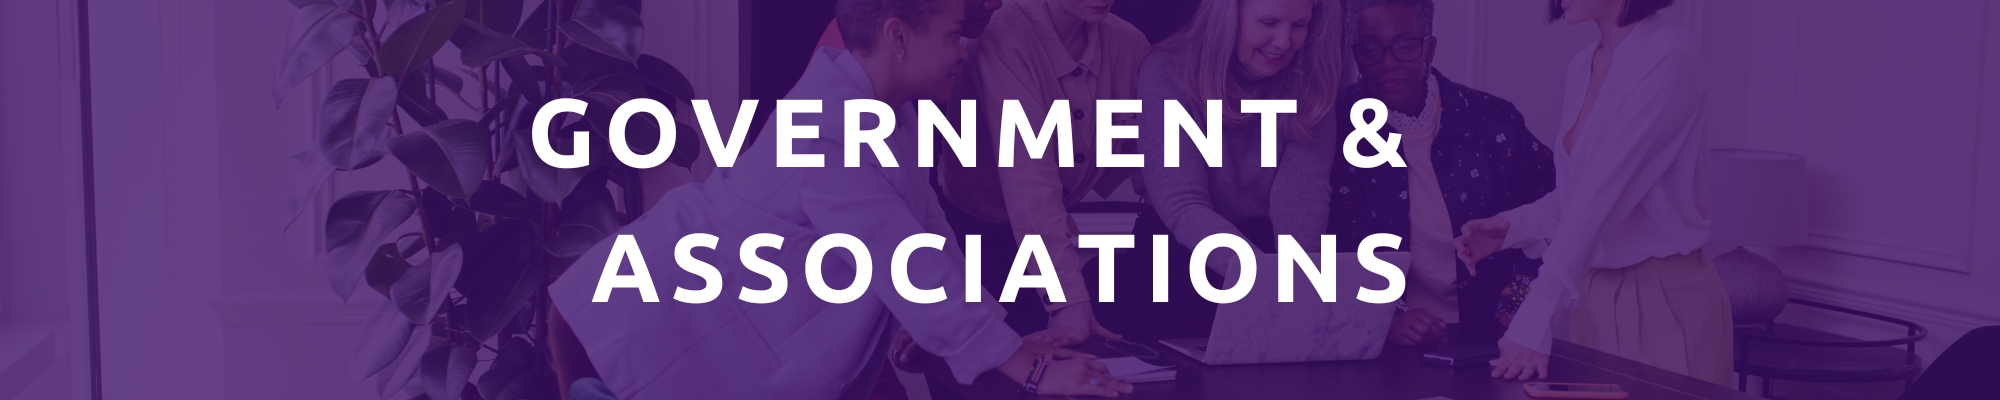 Government Organizations, Professional Associations and Programs